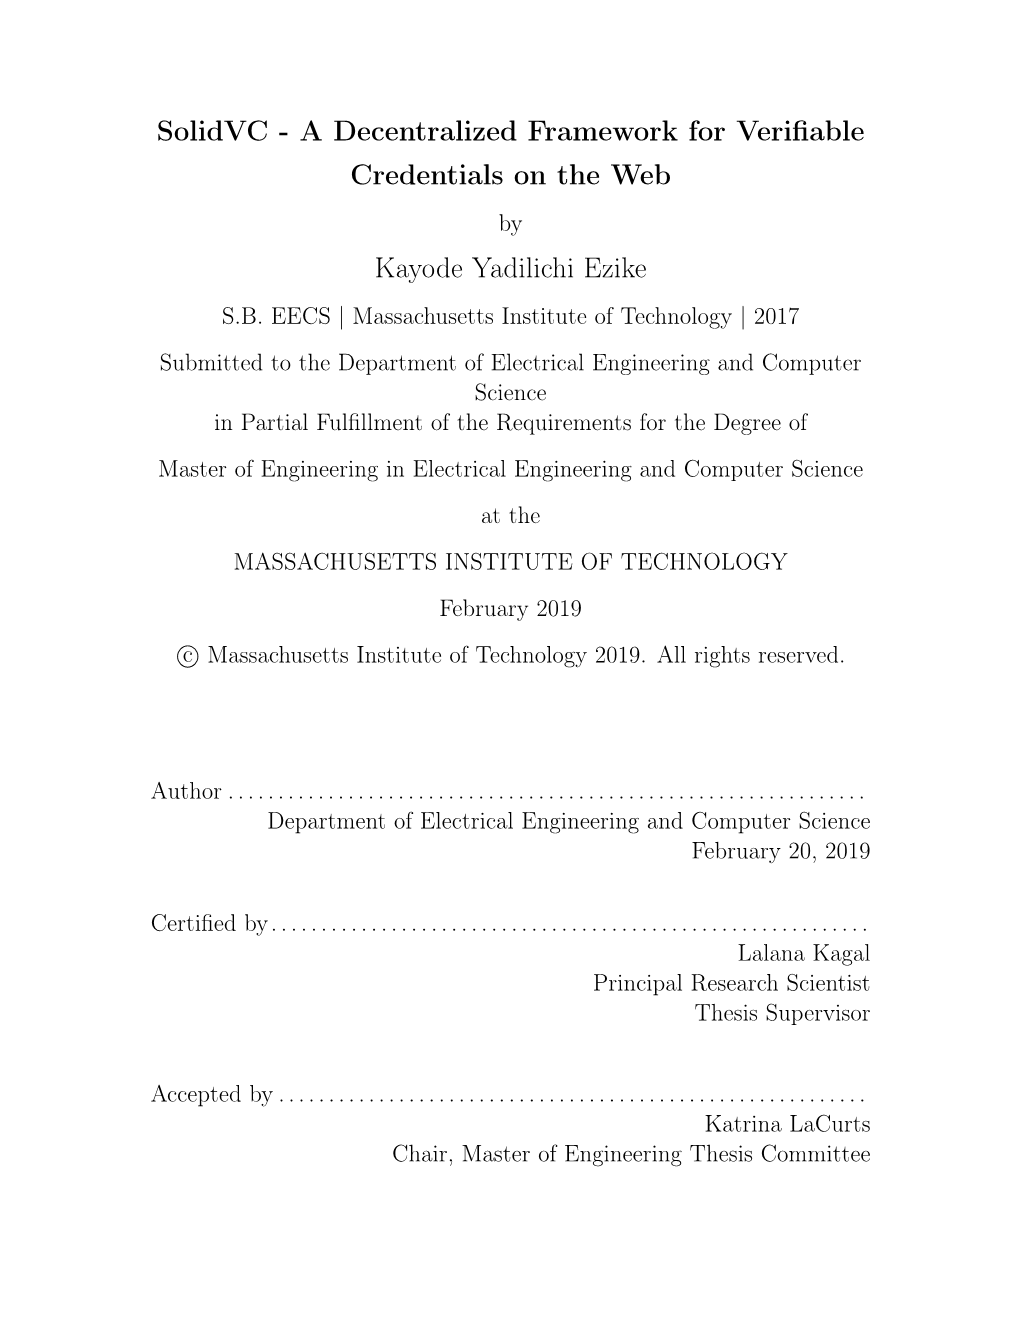 A Decentralized Framework for Verifiable Credentials on the Web by Kayode Yadilichi Ezike S.B